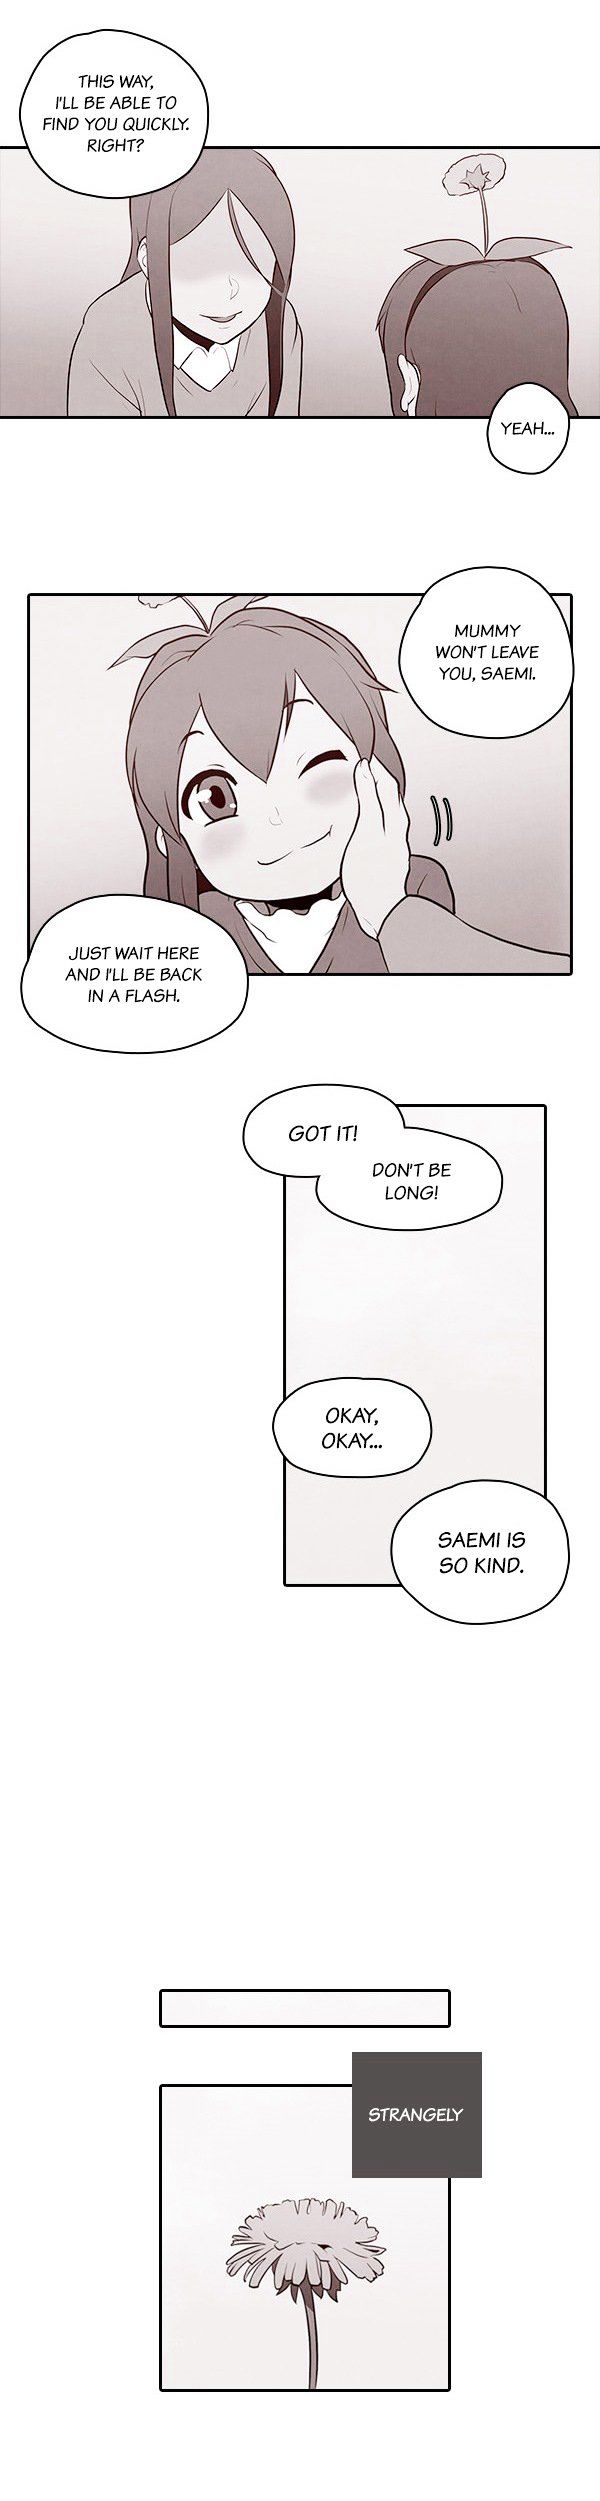 How to Open a Triangular Riceball - Chapter 34 Page 4